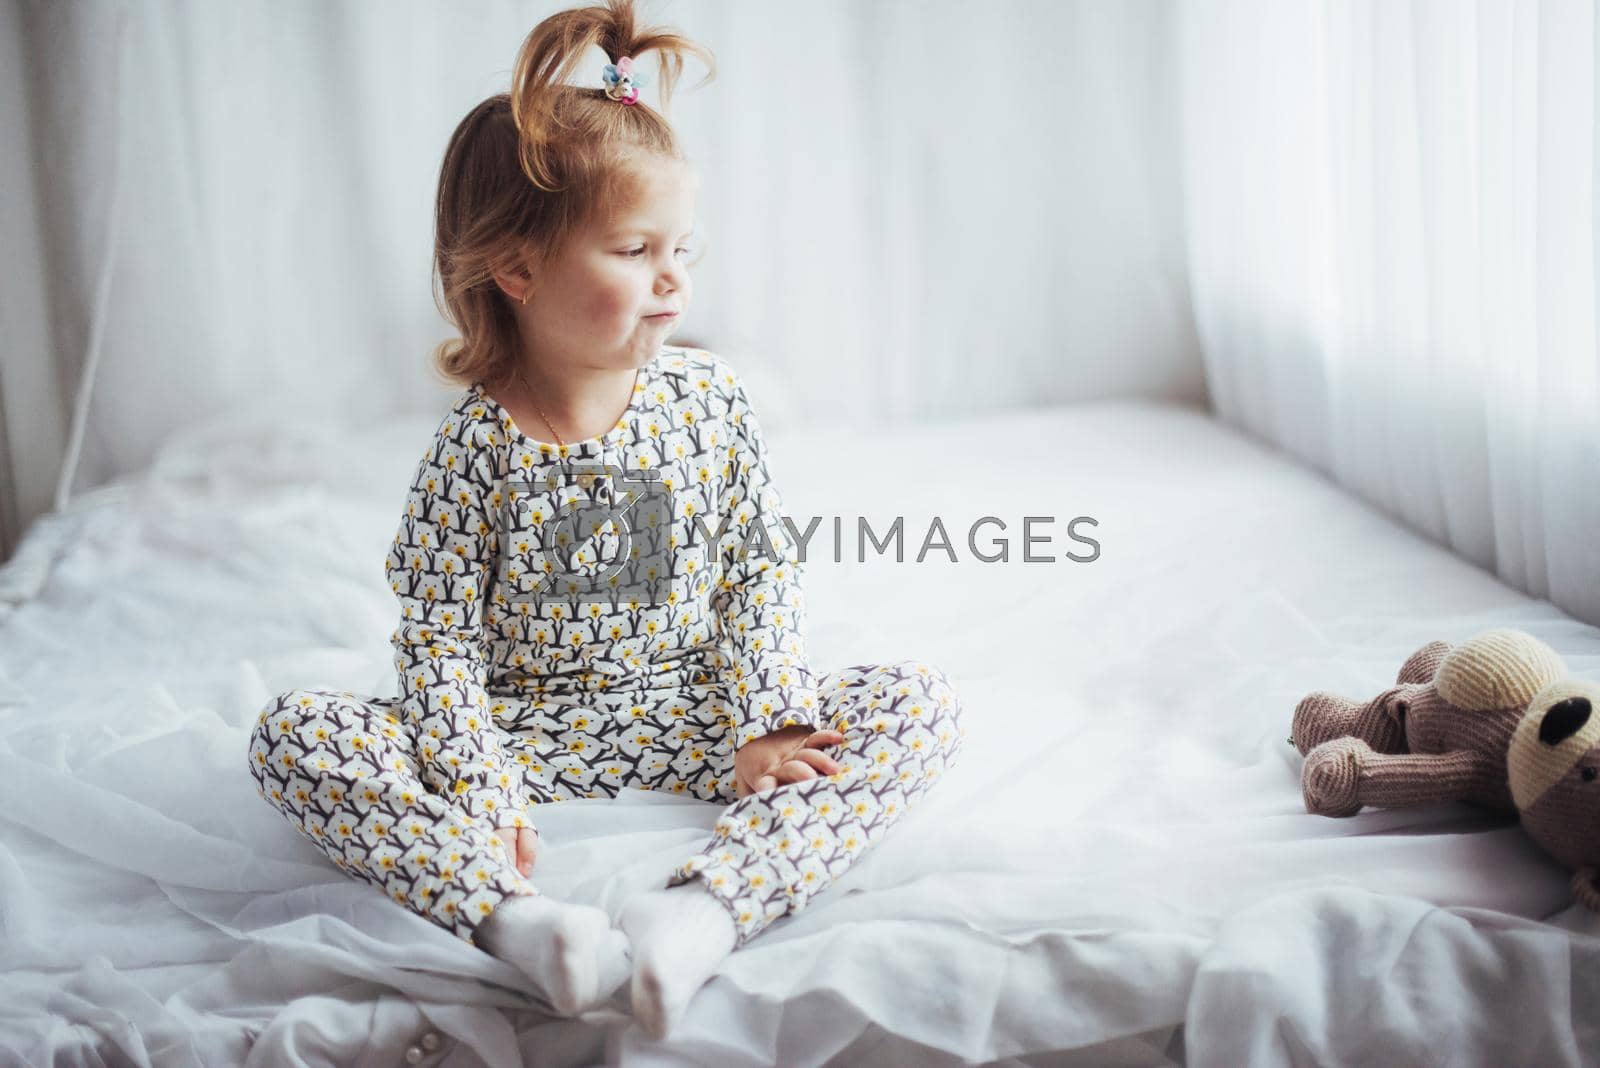 Royalty free image of Child in pajama by Standret